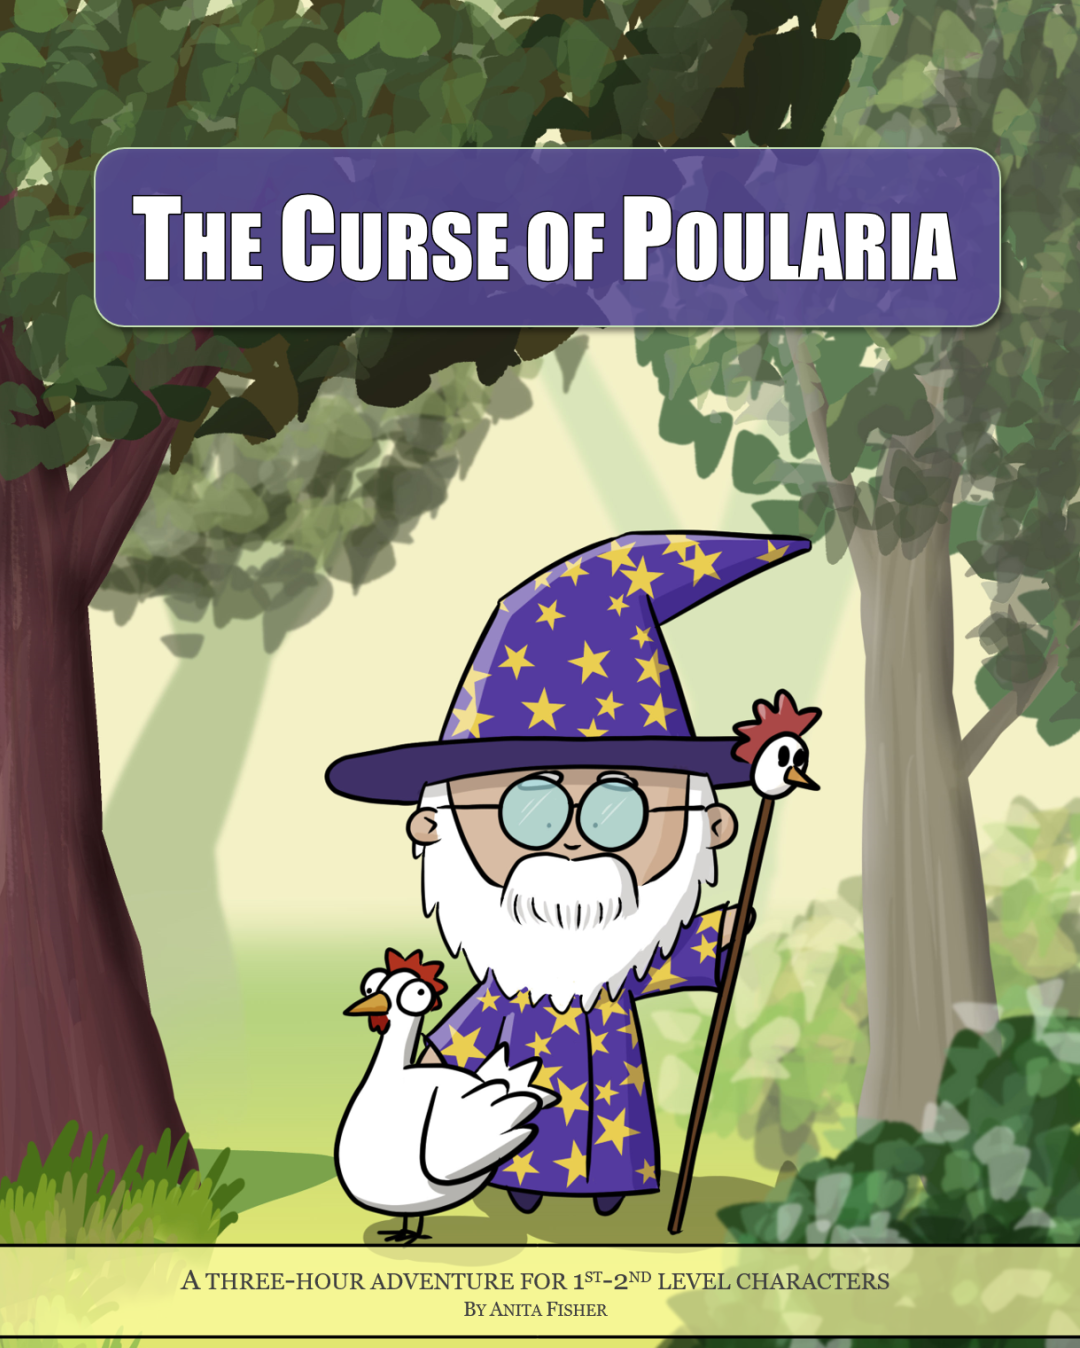 “The Curse of Poularia” is about to be released!